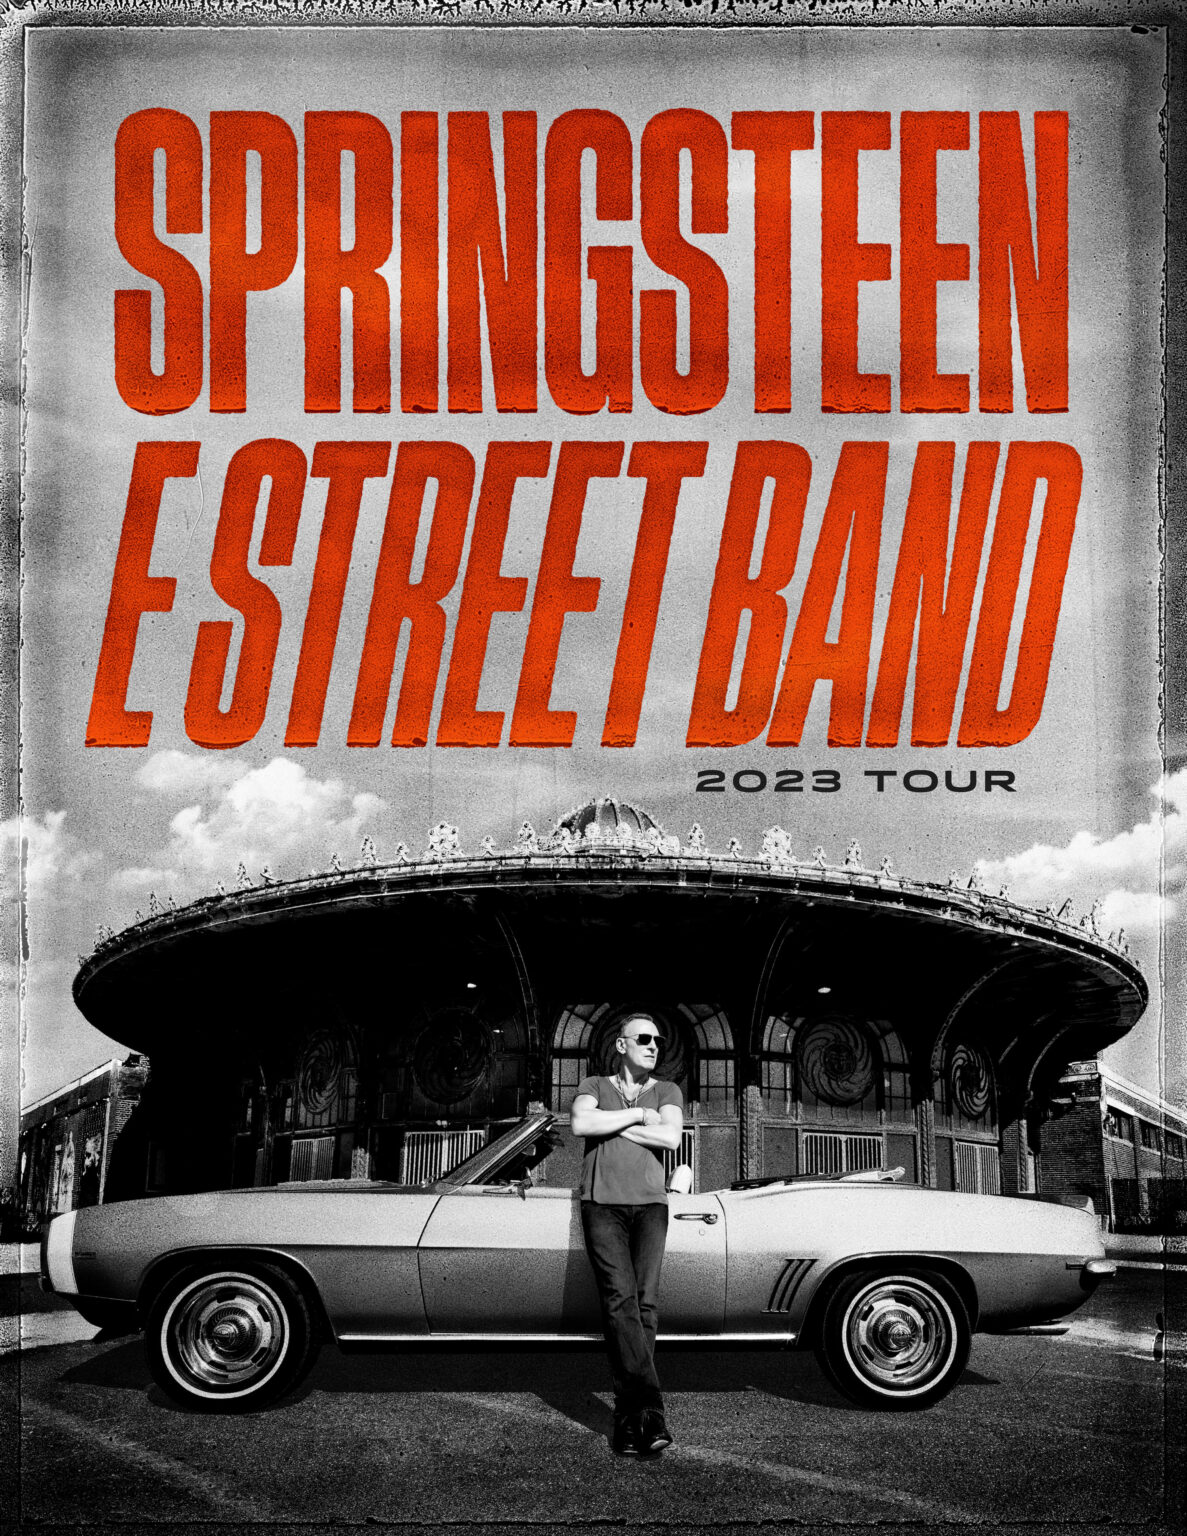 Bruce Springsteen and The E Street Band Announce Four UK Dates on 2023